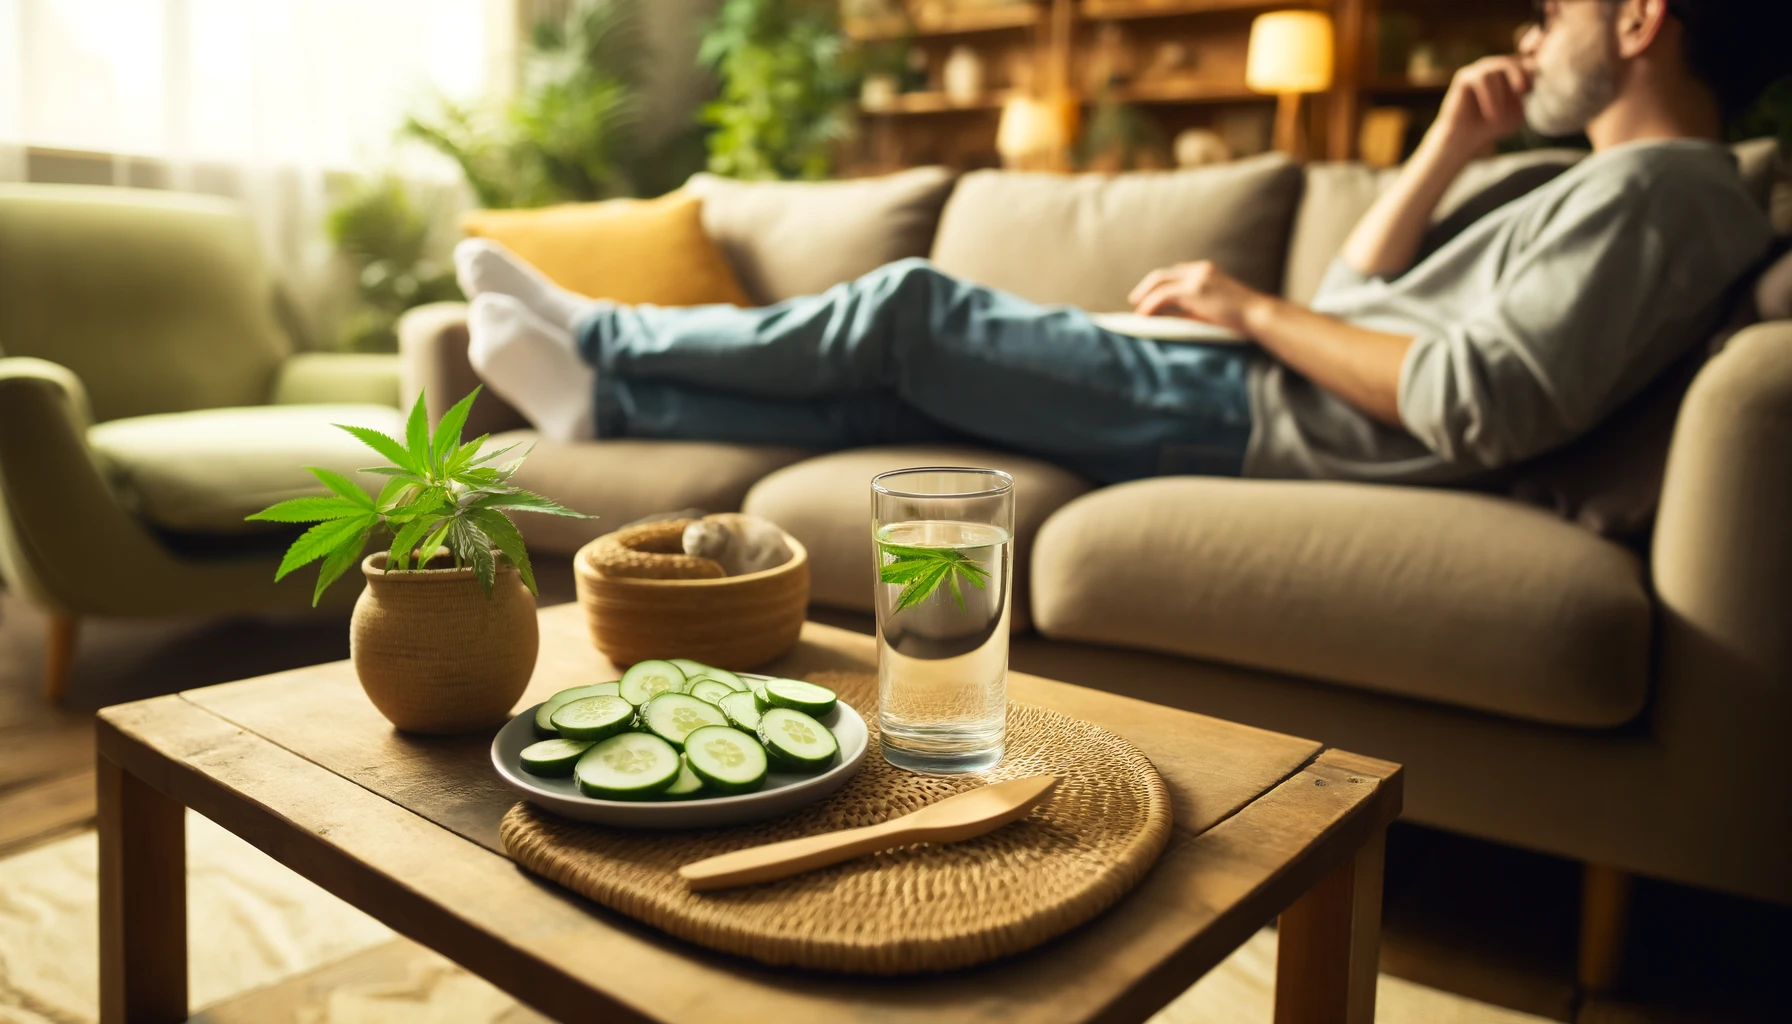 Person relaxing on a couch with water and cucumber slices in a cozy living room